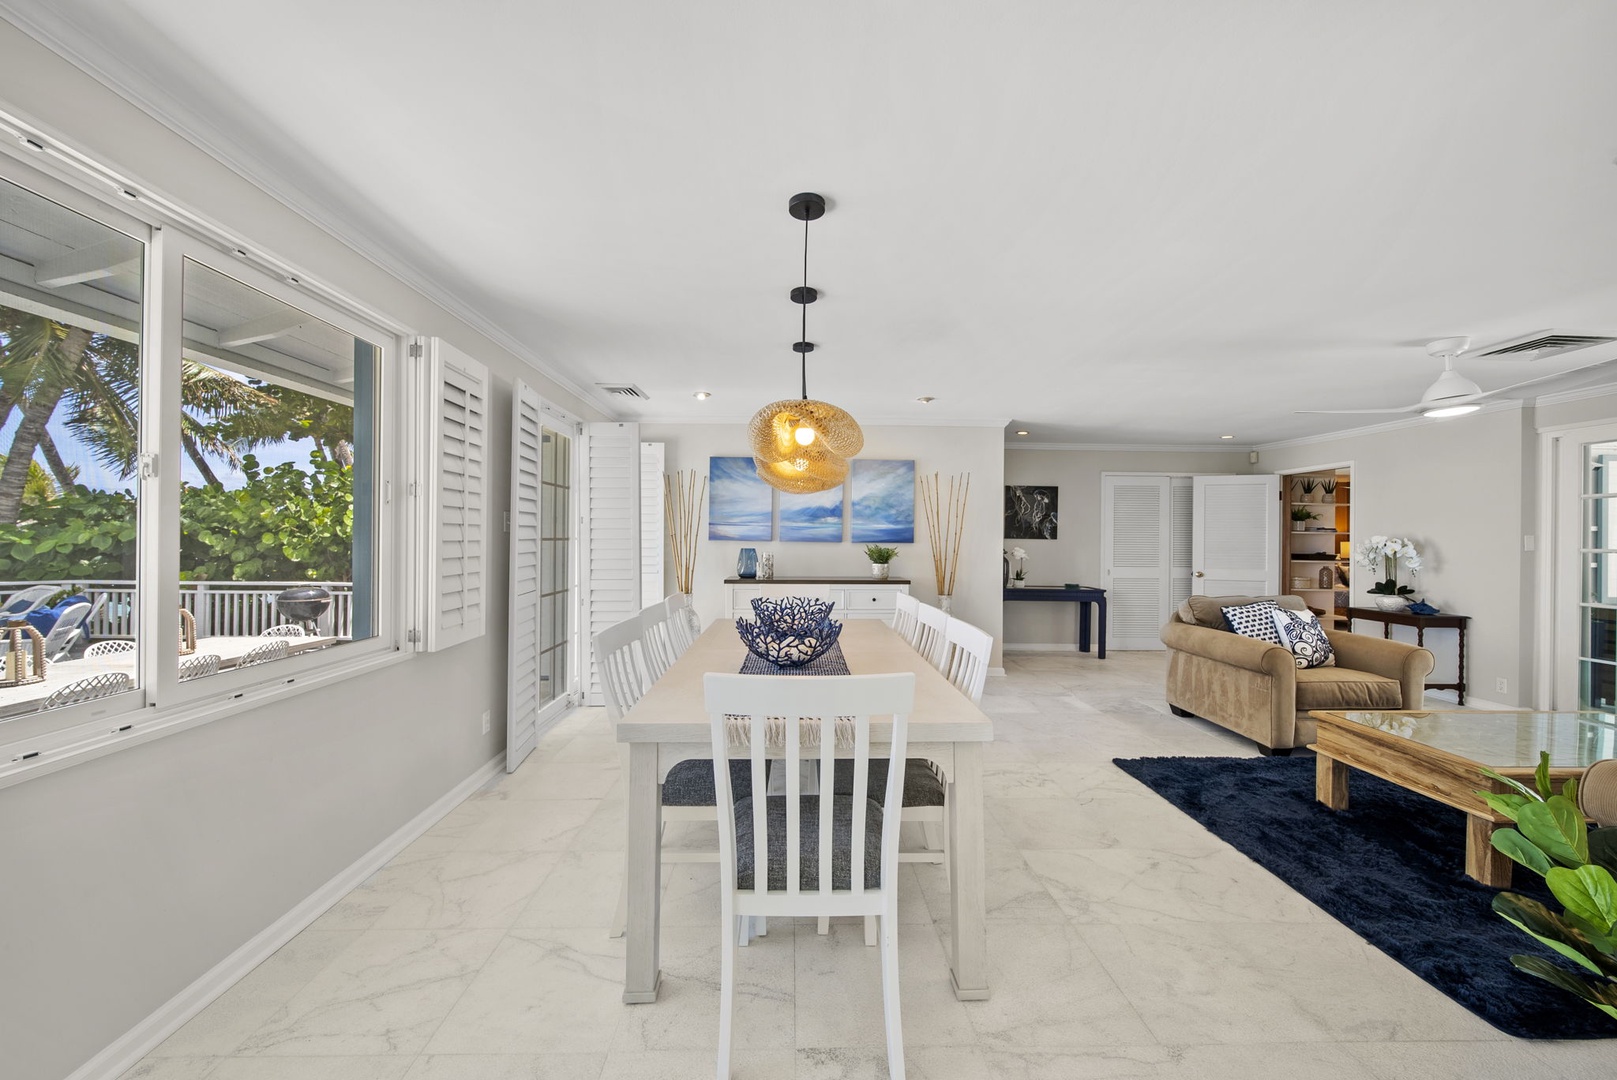 Waimanalo Vacation Rentals, Mana Kai at Waimanalo - Dining table for eight, with extra seating up to ten.